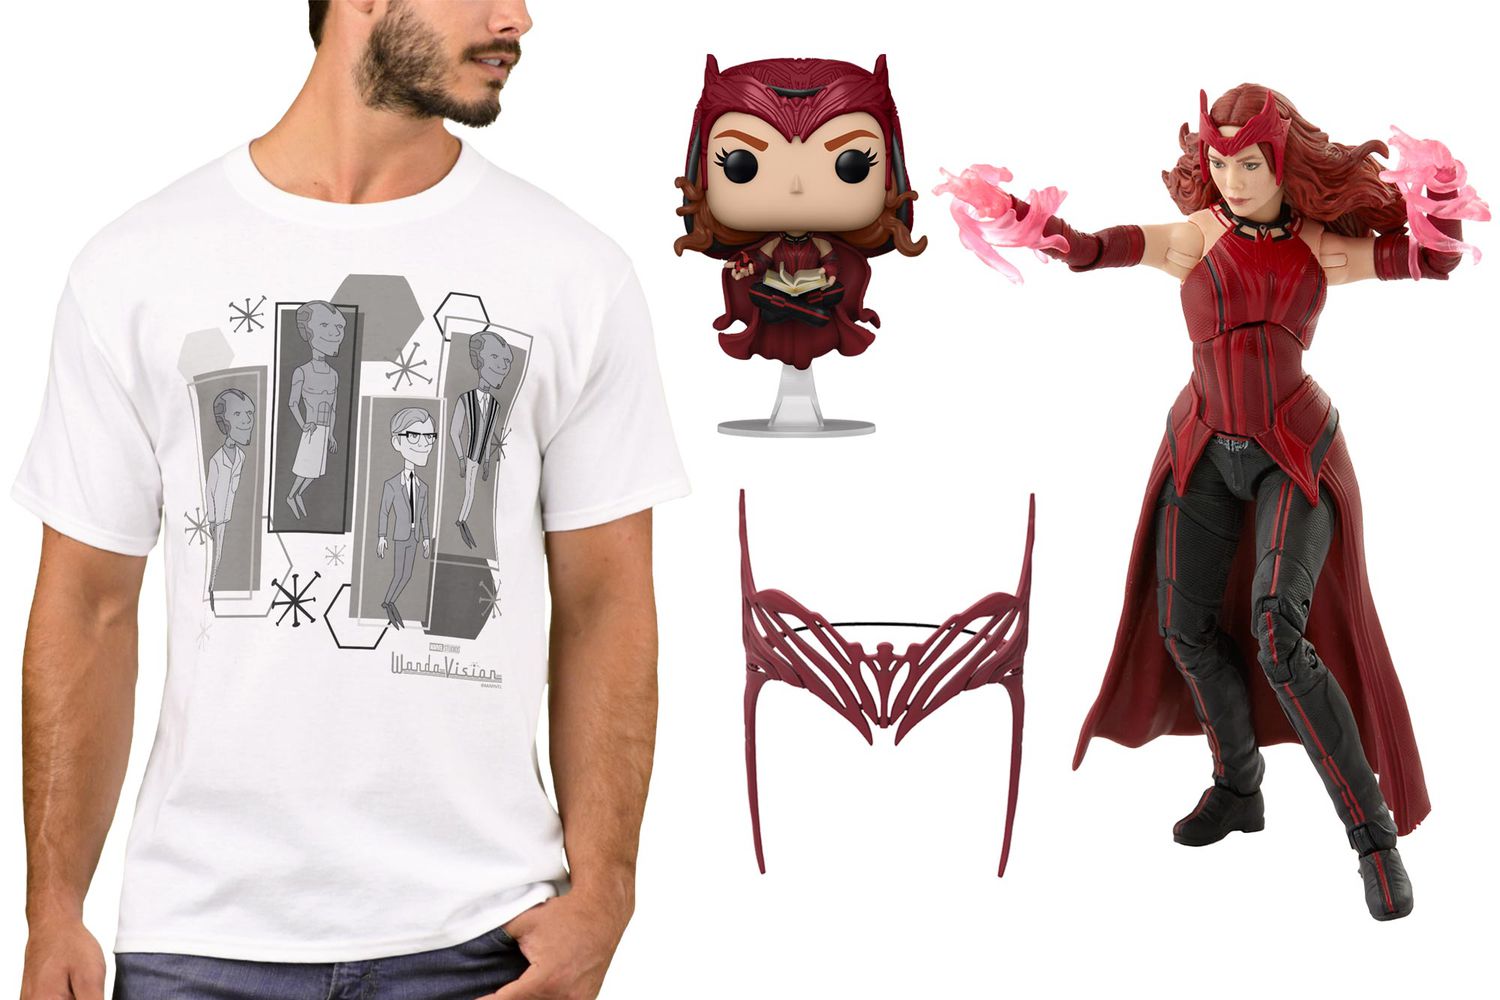 Disney releases new WandaVision merch — get your exclusive first-look